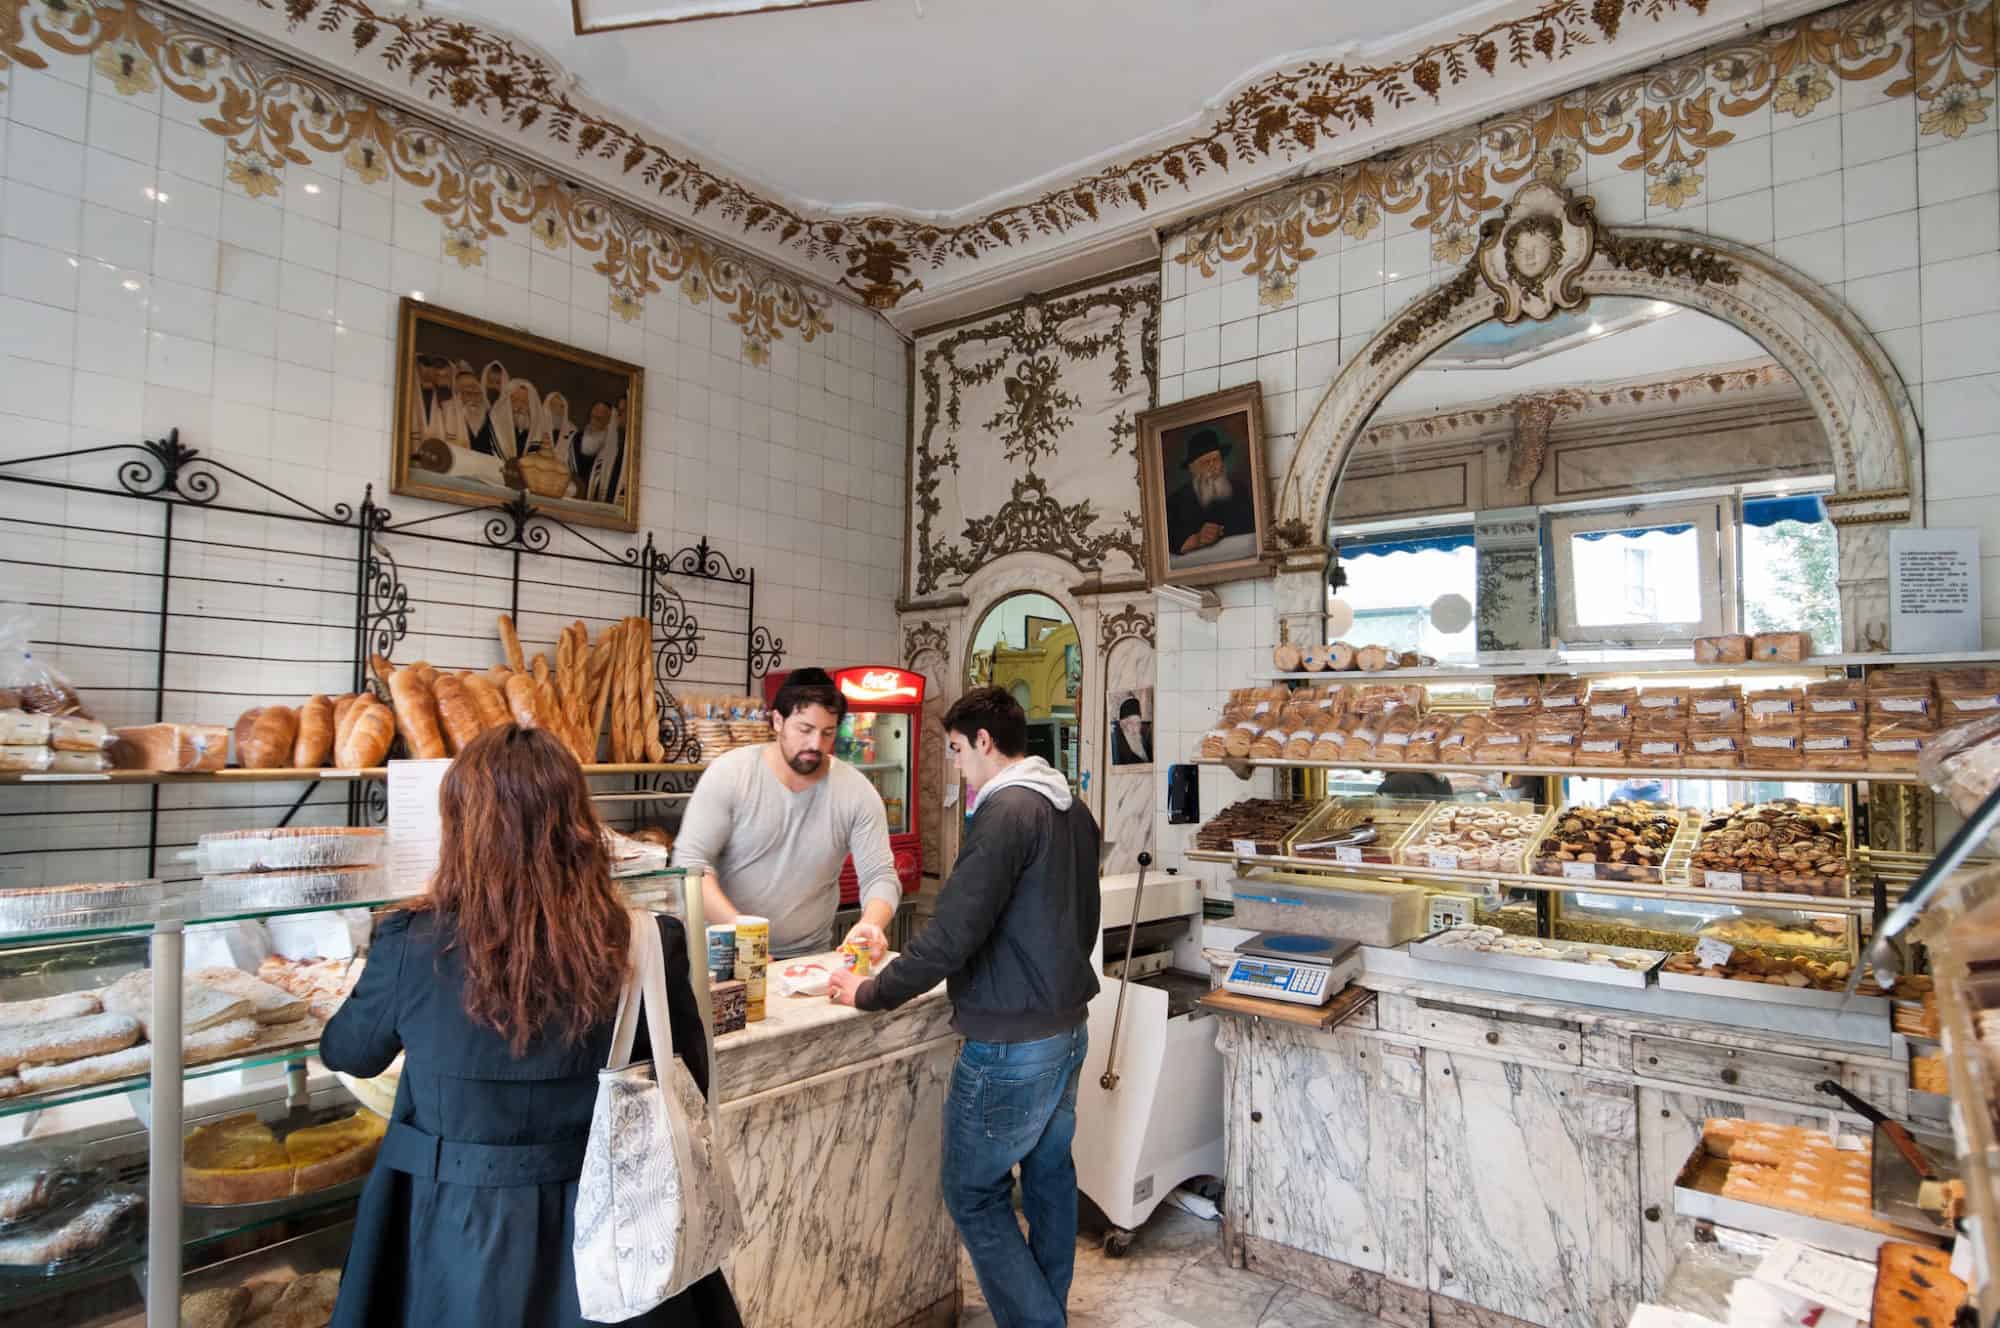 Parisian customers buy baked goods in a beautiful, bright boulangerie